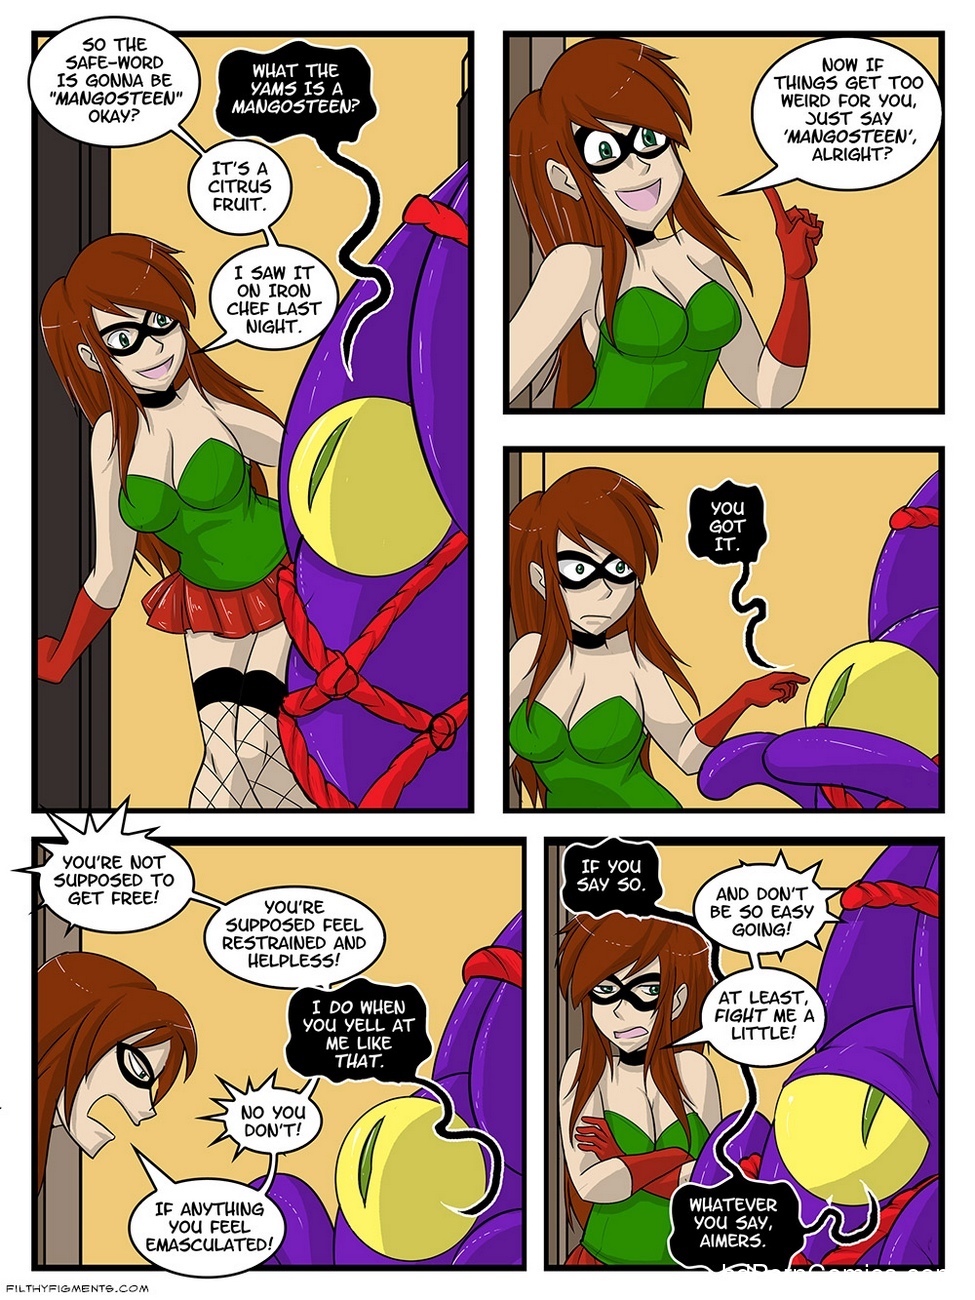 Halloween Tentacle Porn - A Date With A Tentacle Monster Halloween Special comic porn ...